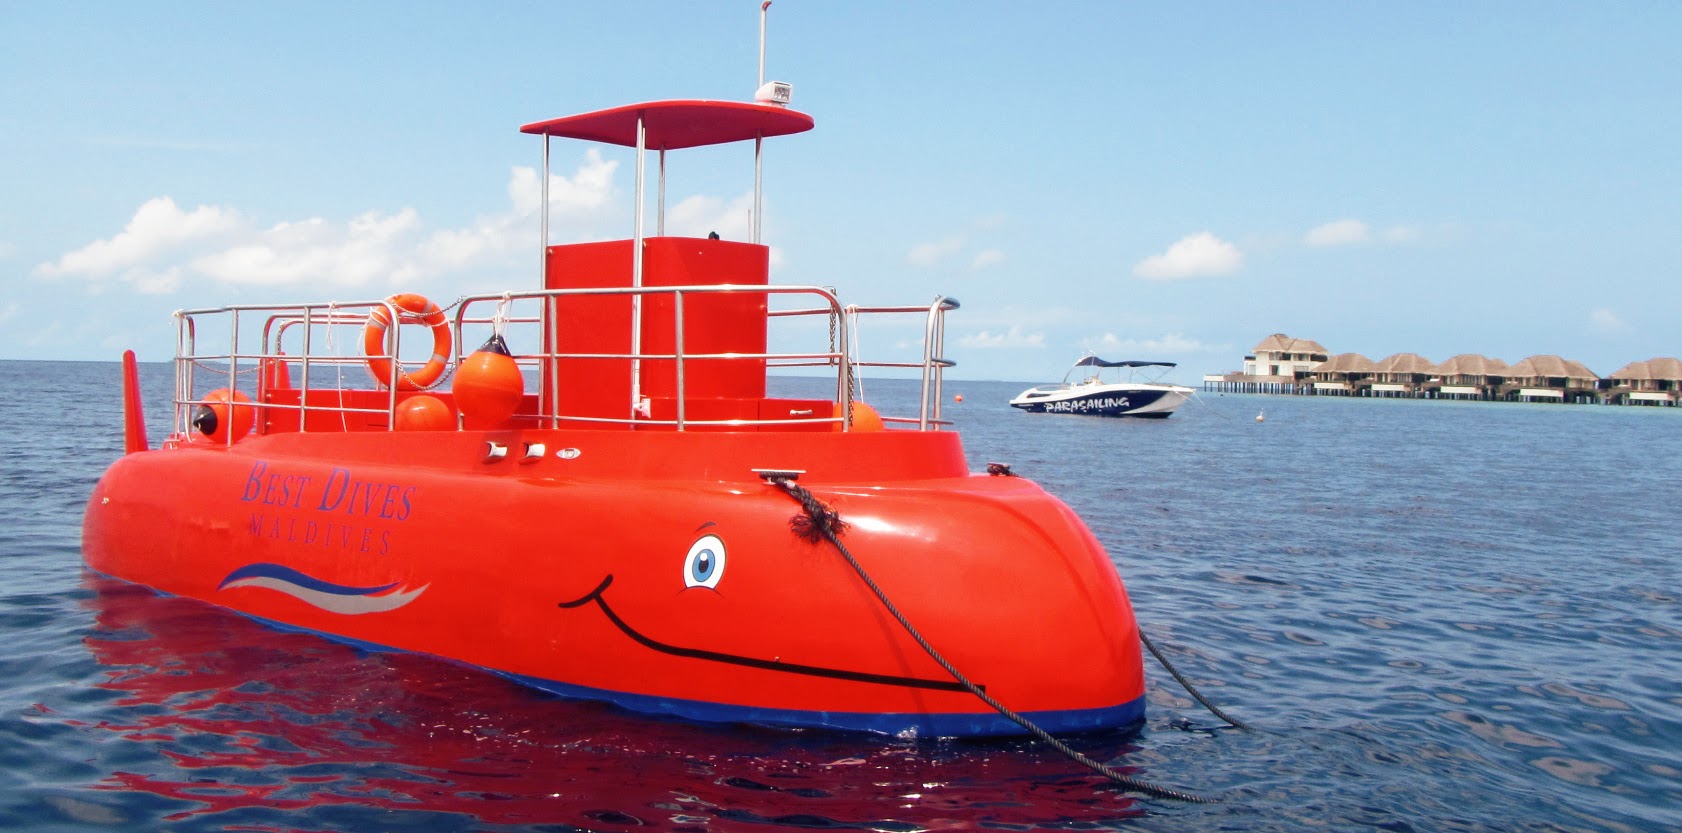 The semi-submersible submarine gets guests up close to the underwater world of the Maldives